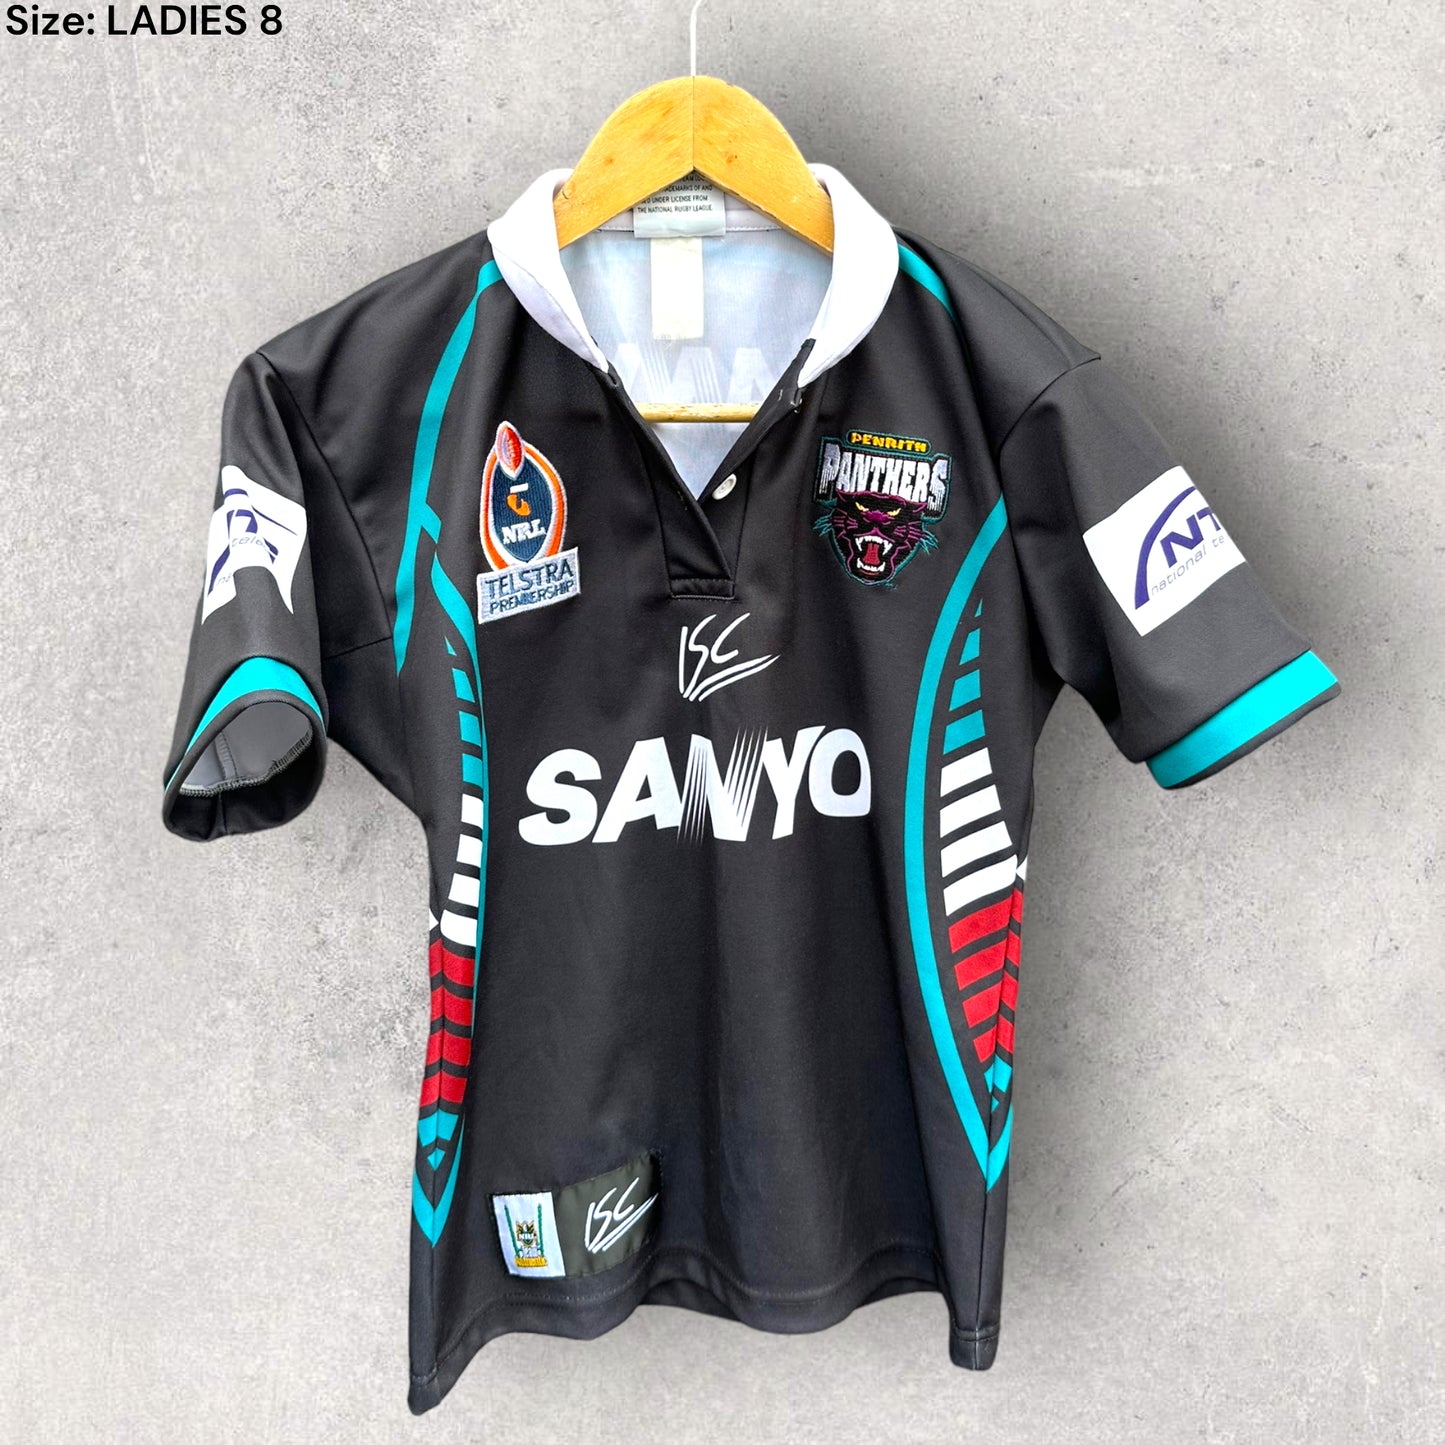 PENRITH PANTHERS 2005 HOME JERSEY LADIES